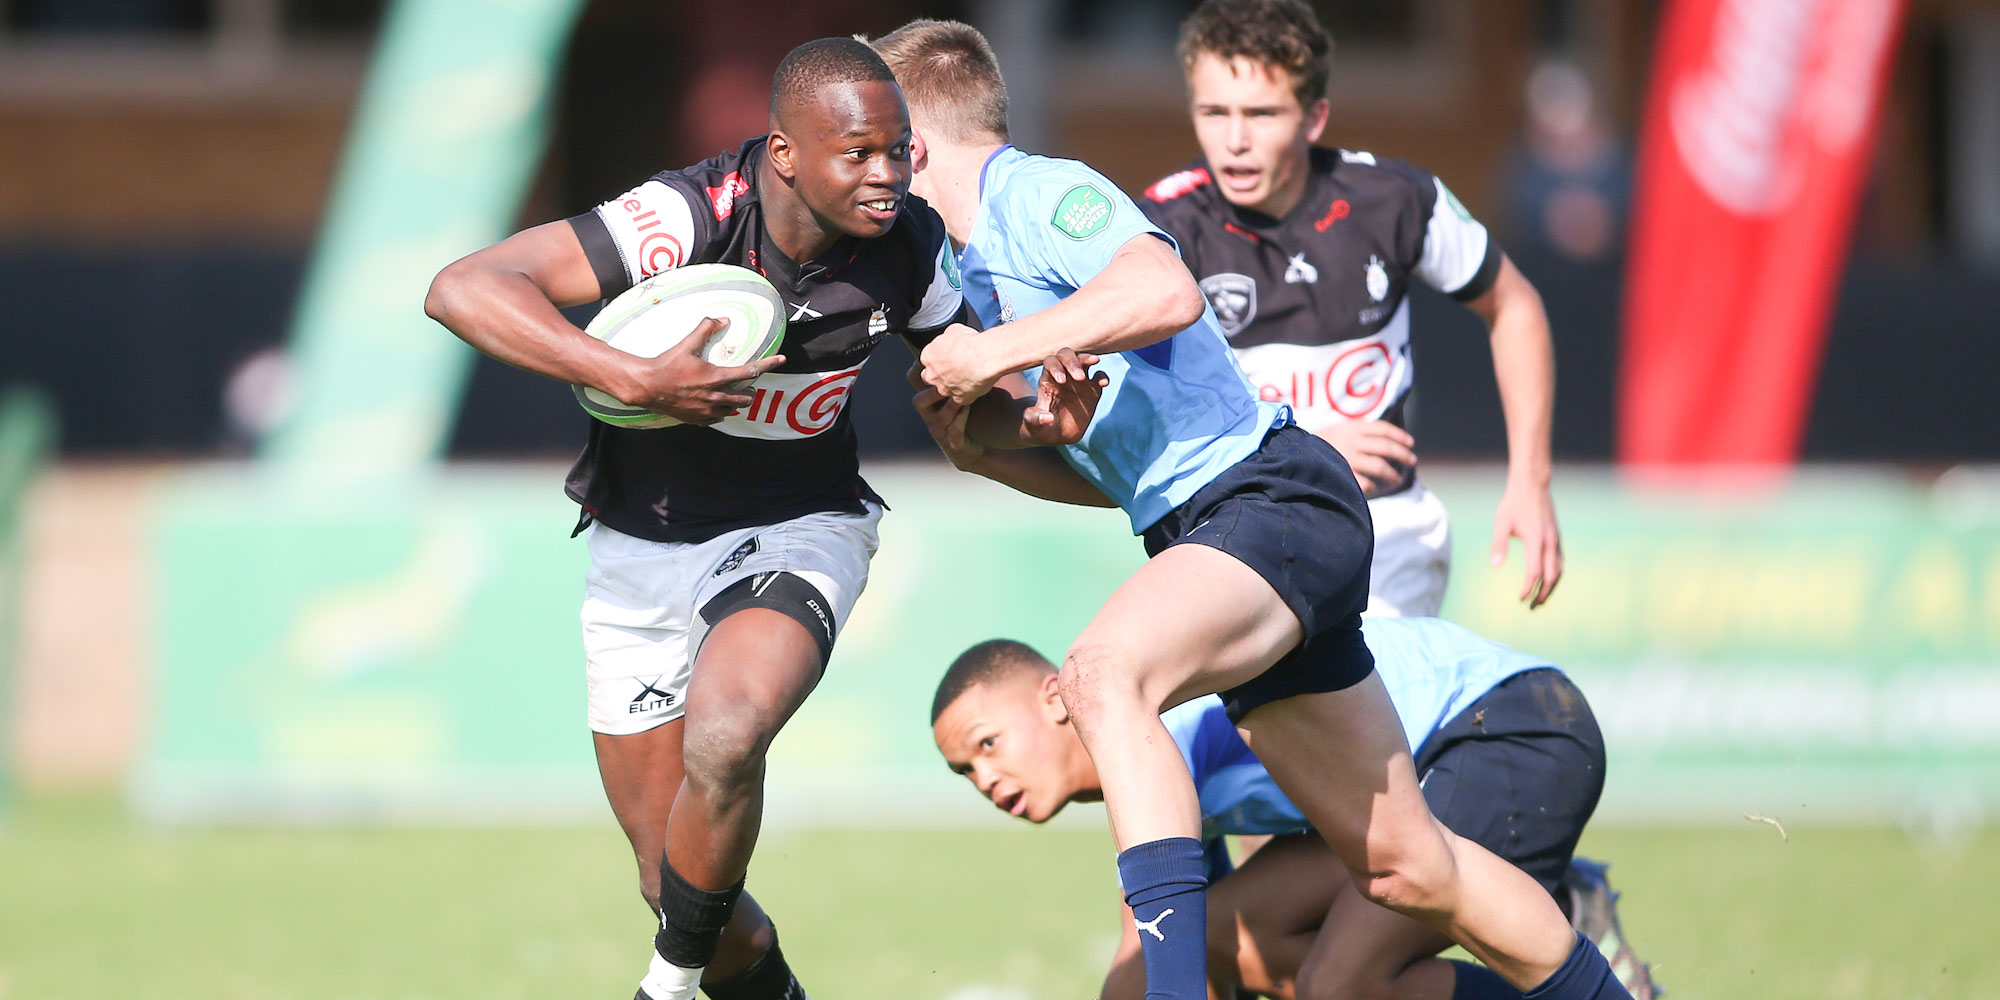 The Sharks on attack against the Blue Bulls.